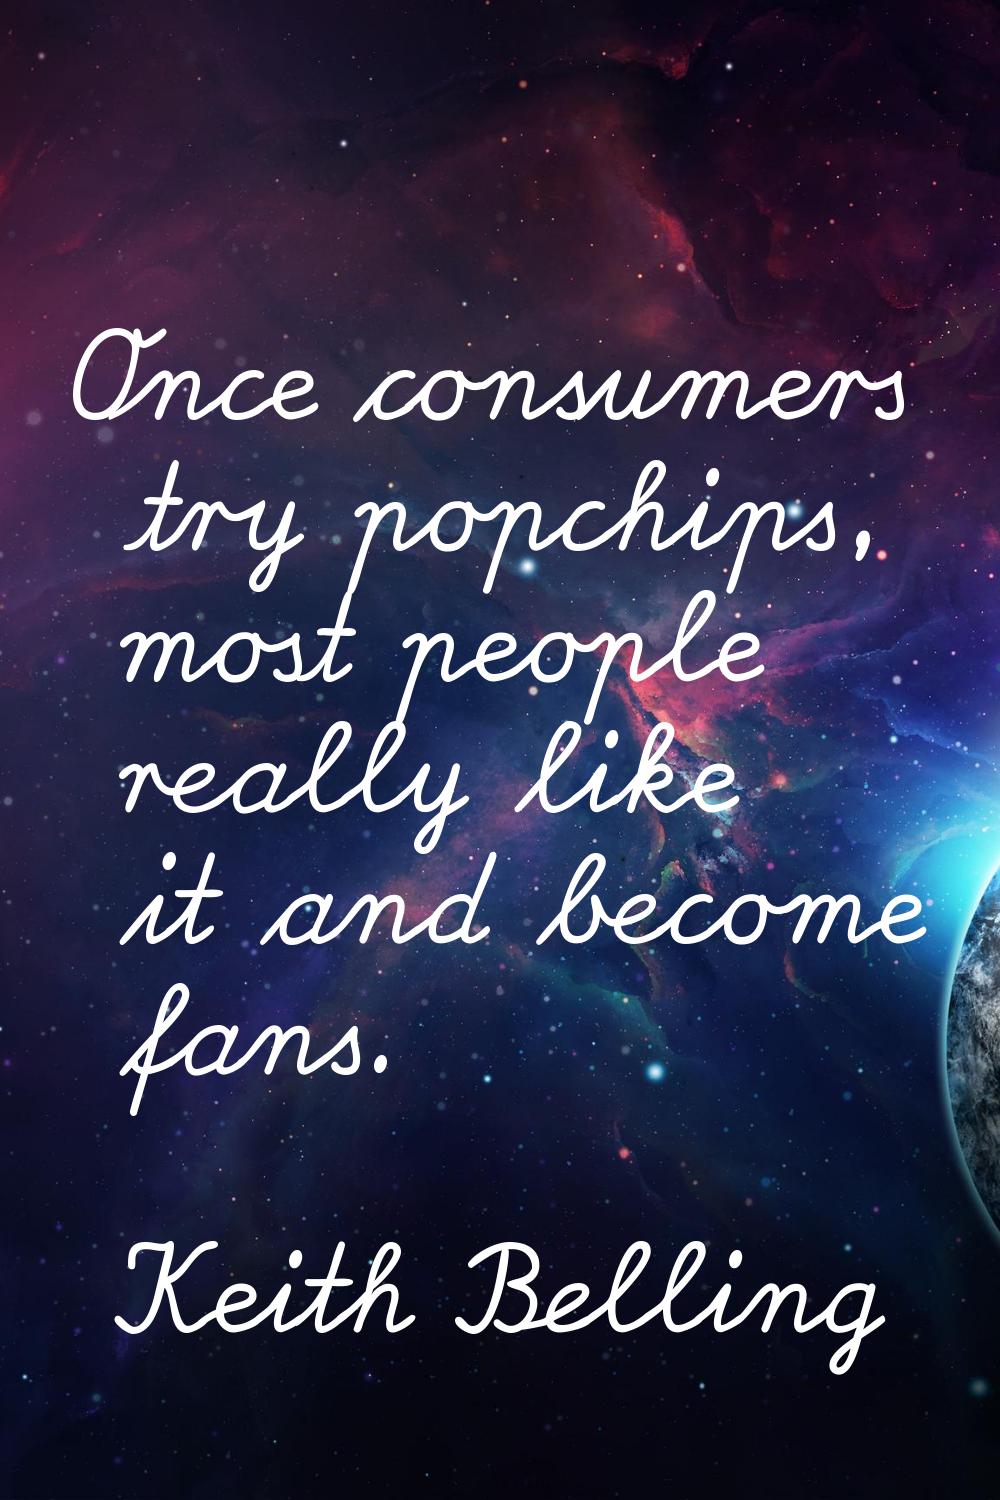 Once consumers try popchips, most people really like it and become fans.